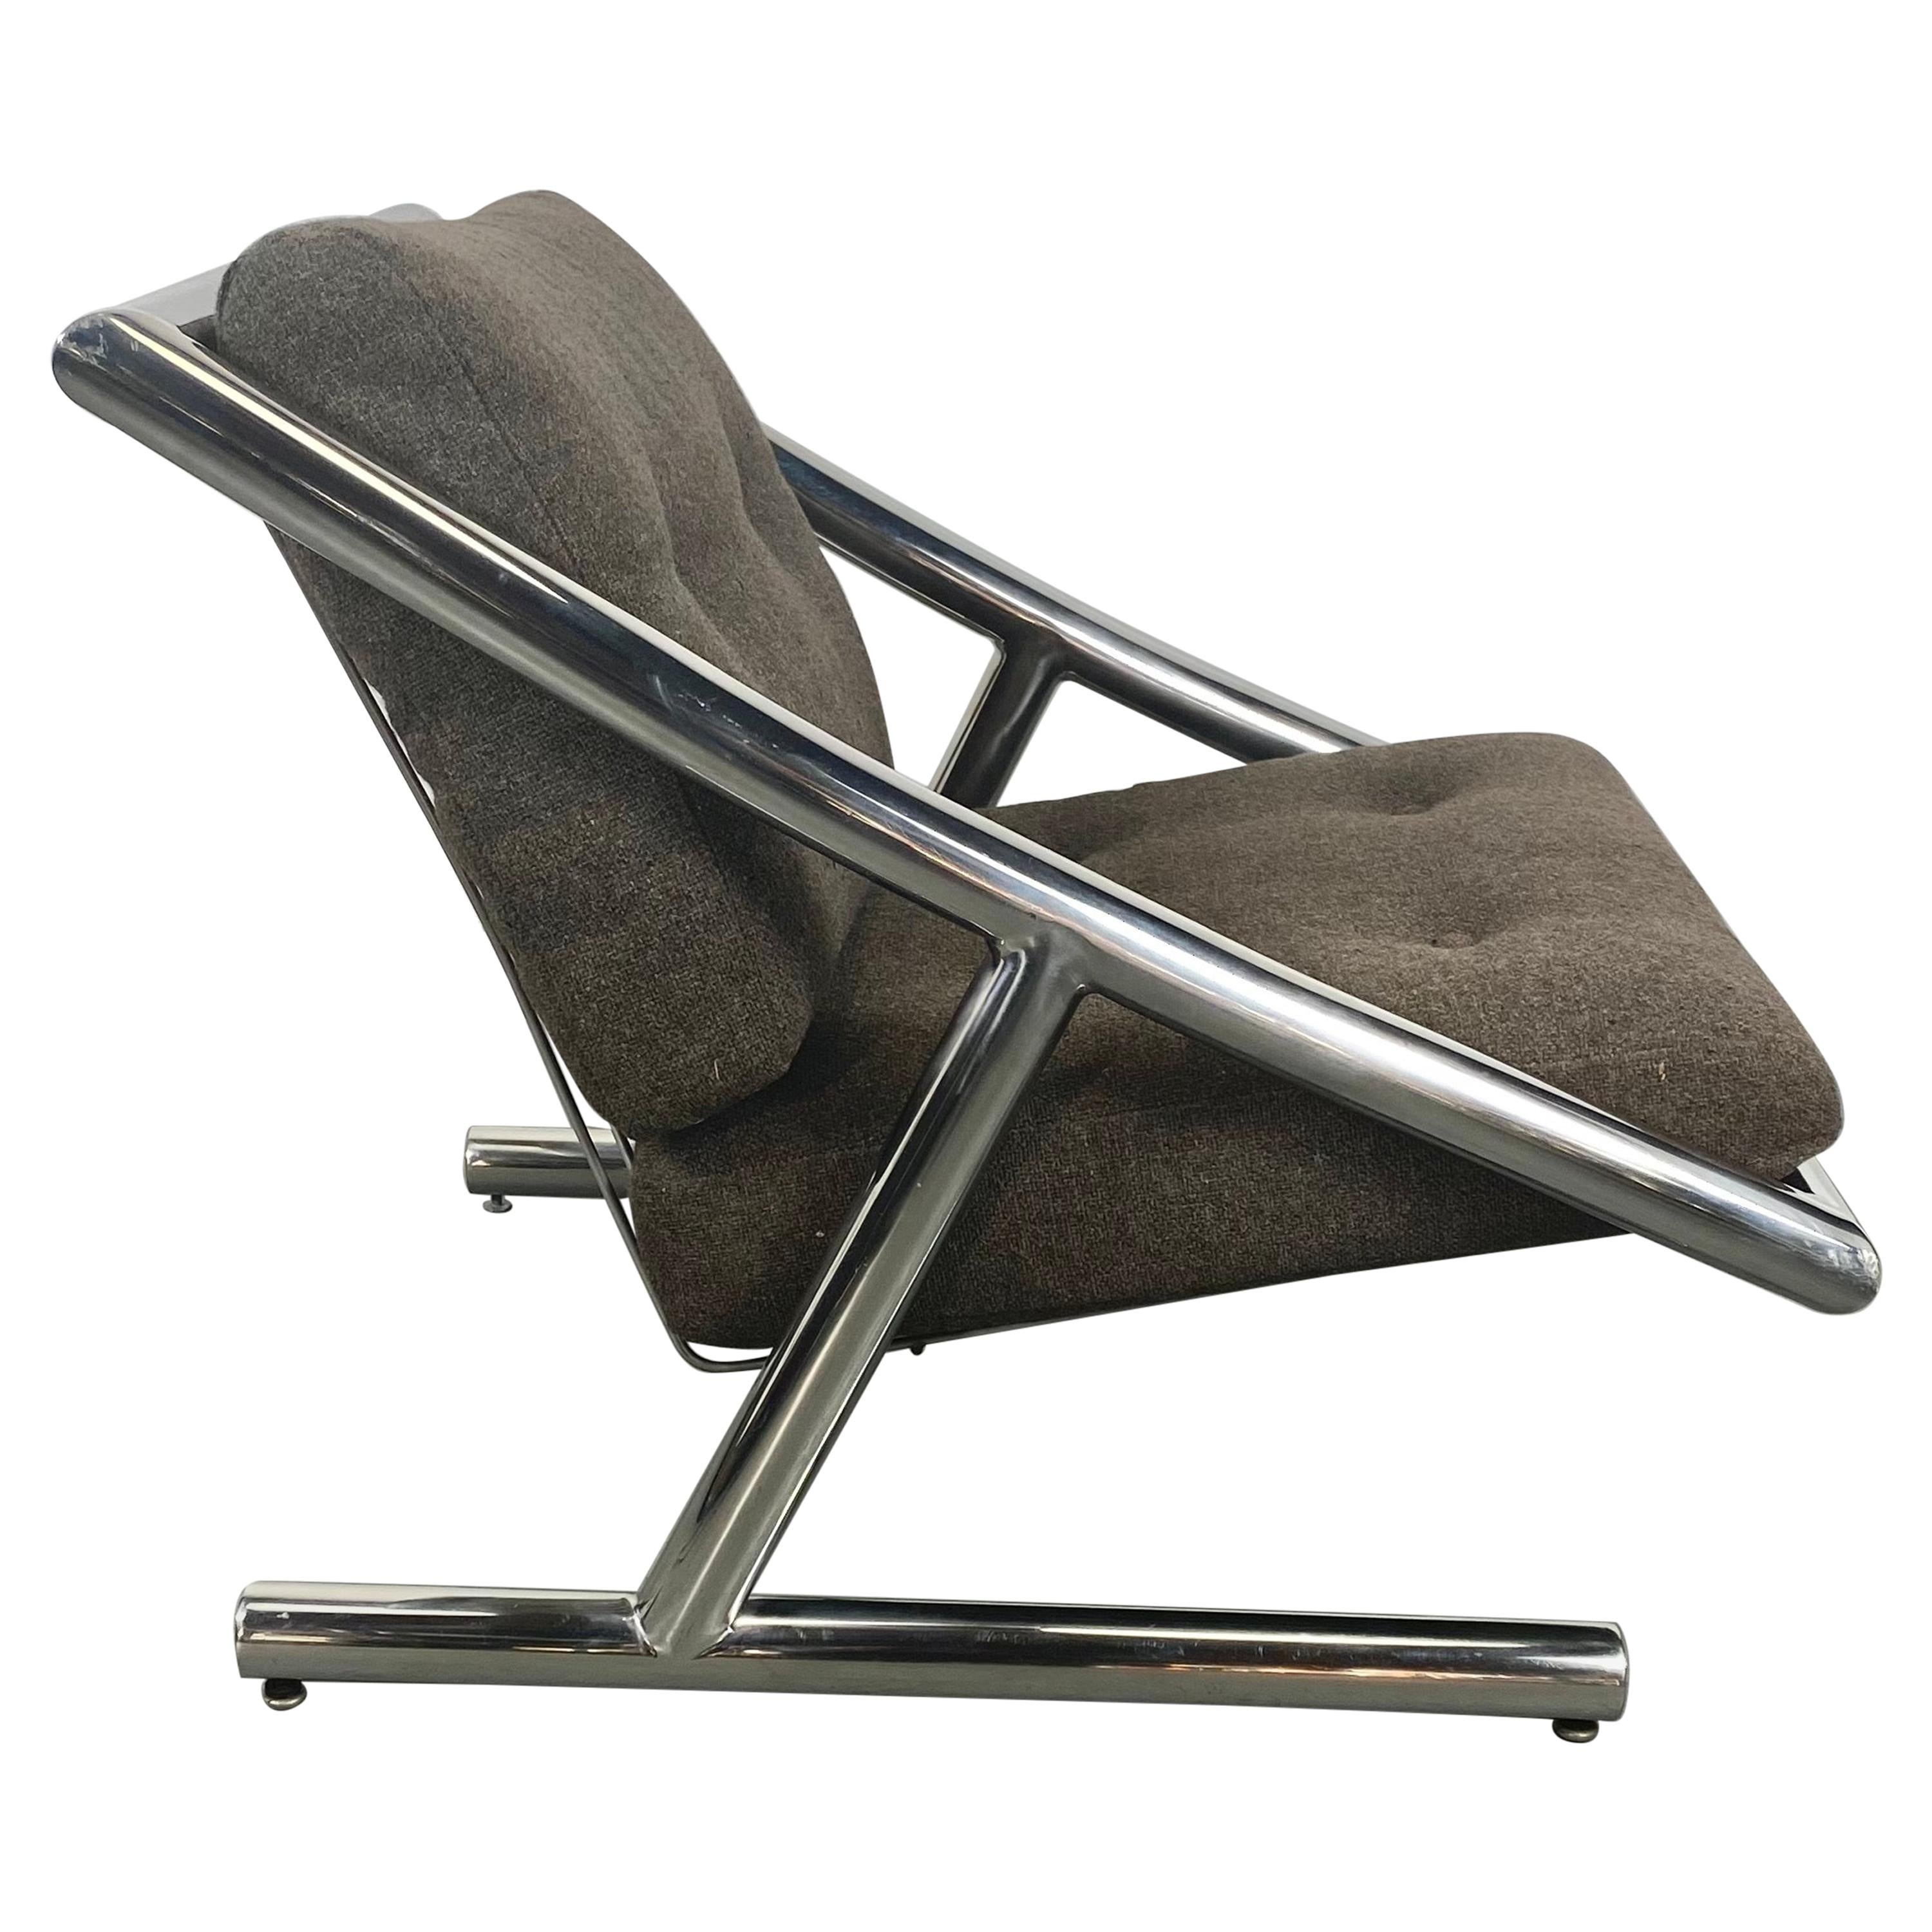 Rare Space Age, Modernist Chromed Steel Lounge Chair by Plato Ginello, Italy